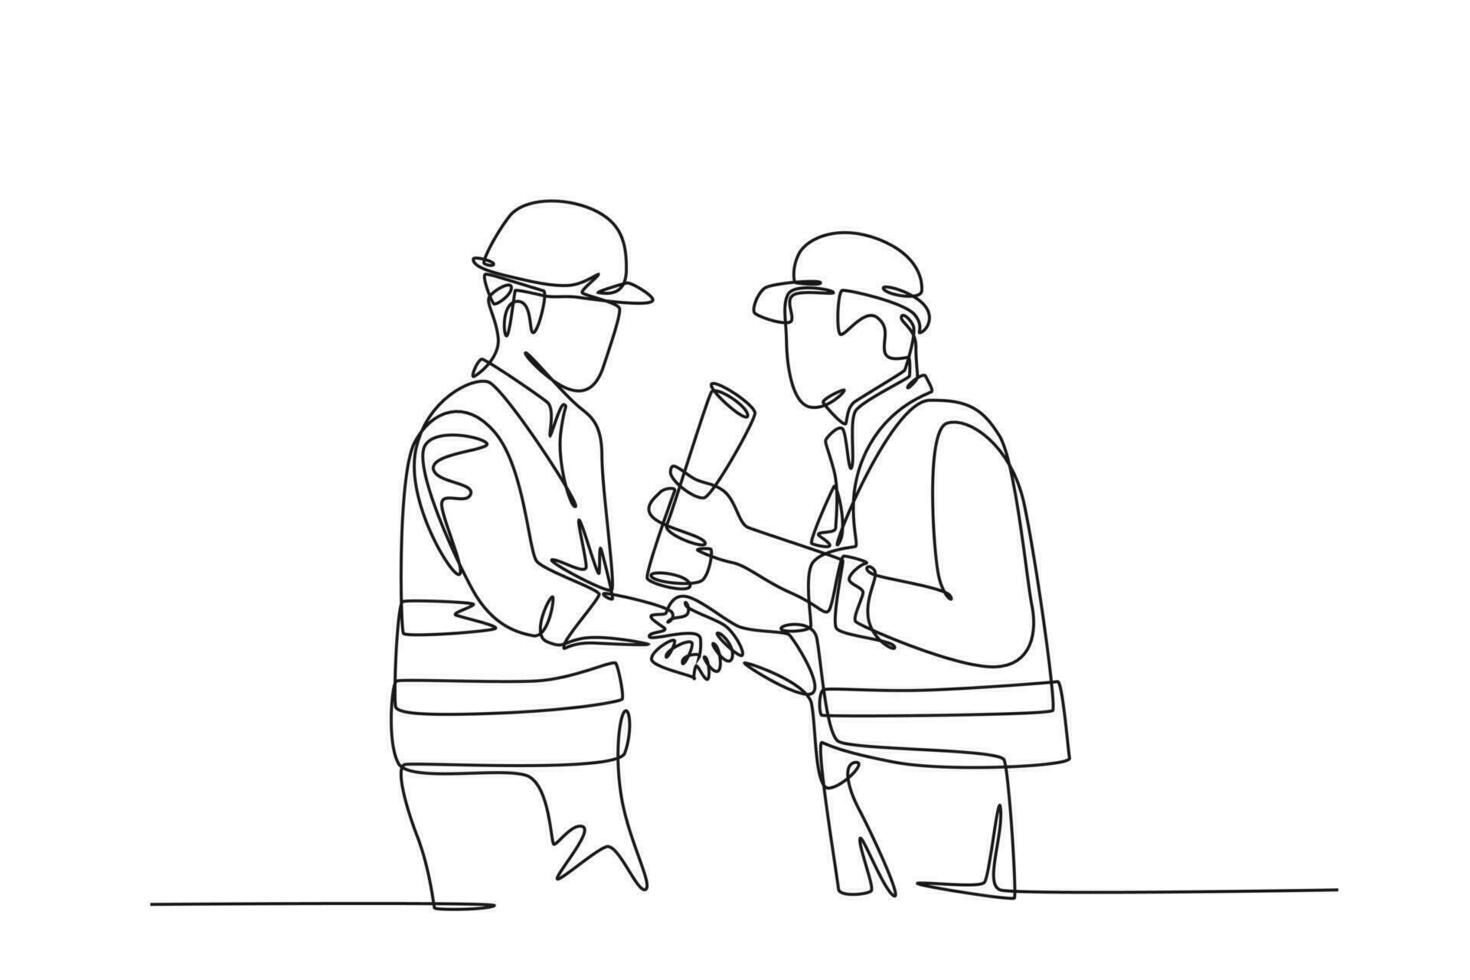 Single one line drawing architect holding on roll paper, builder foreman wearing construction vest and helmet handshake to deal project. Great teamwork. Continuous line draw design vector illustration